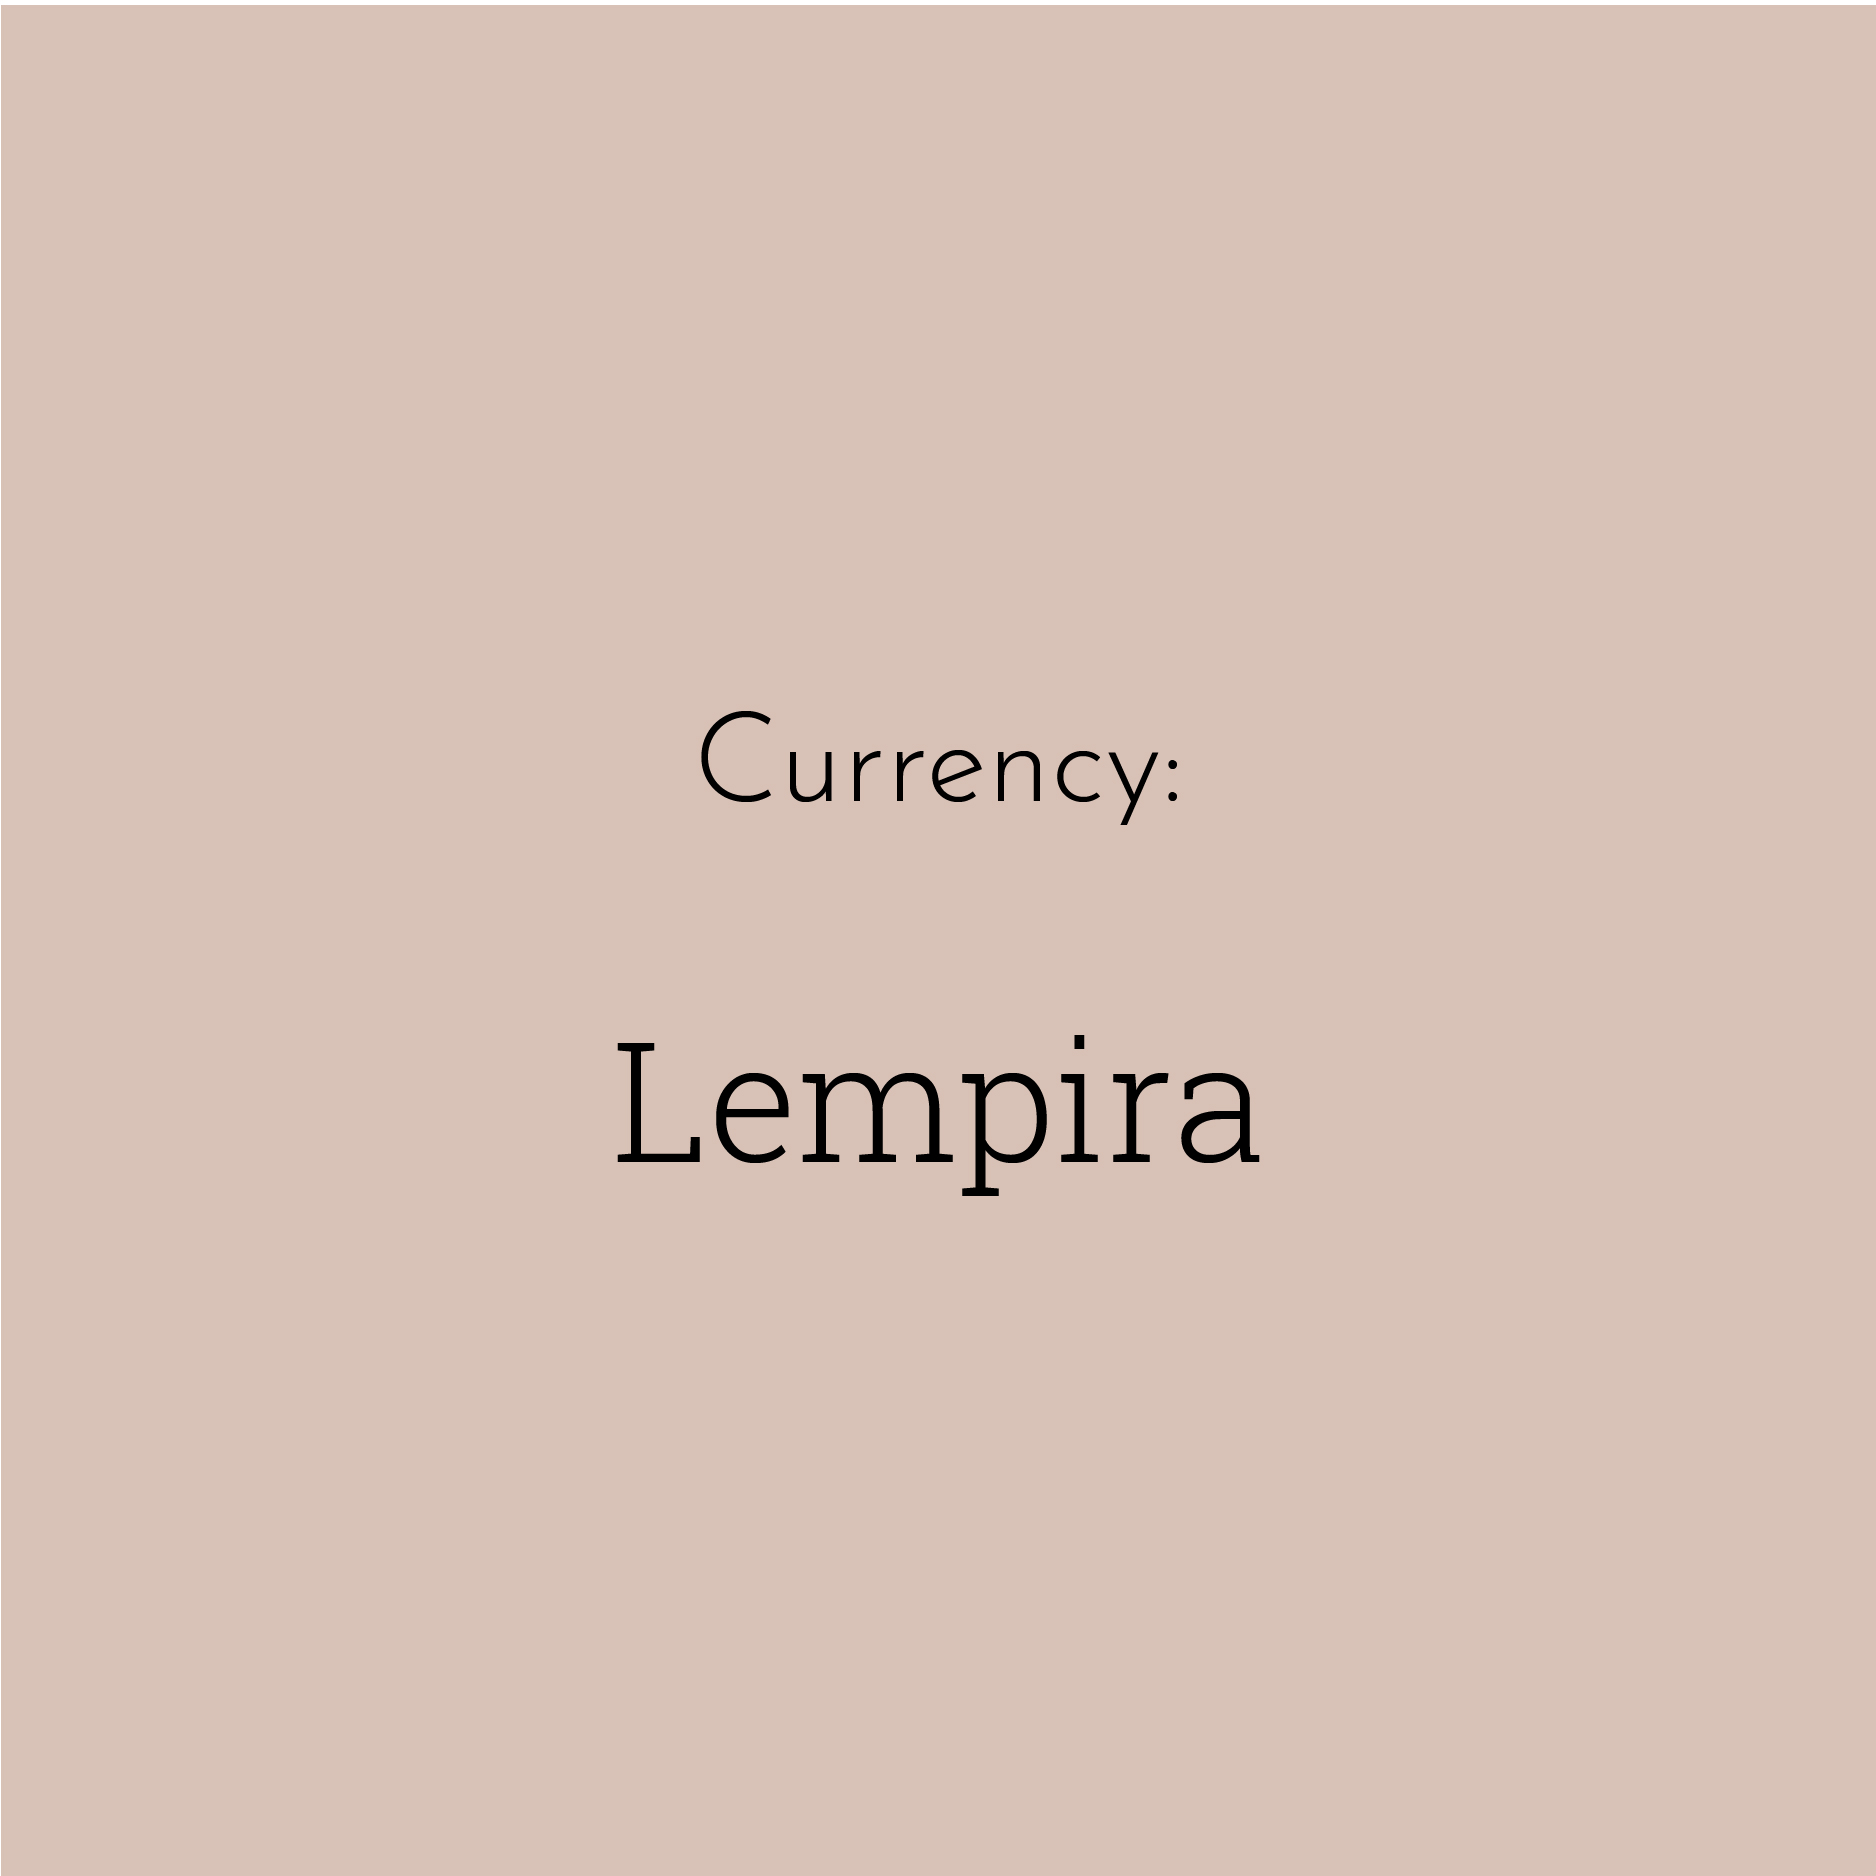 A solid brown block contains the text “Lempira”